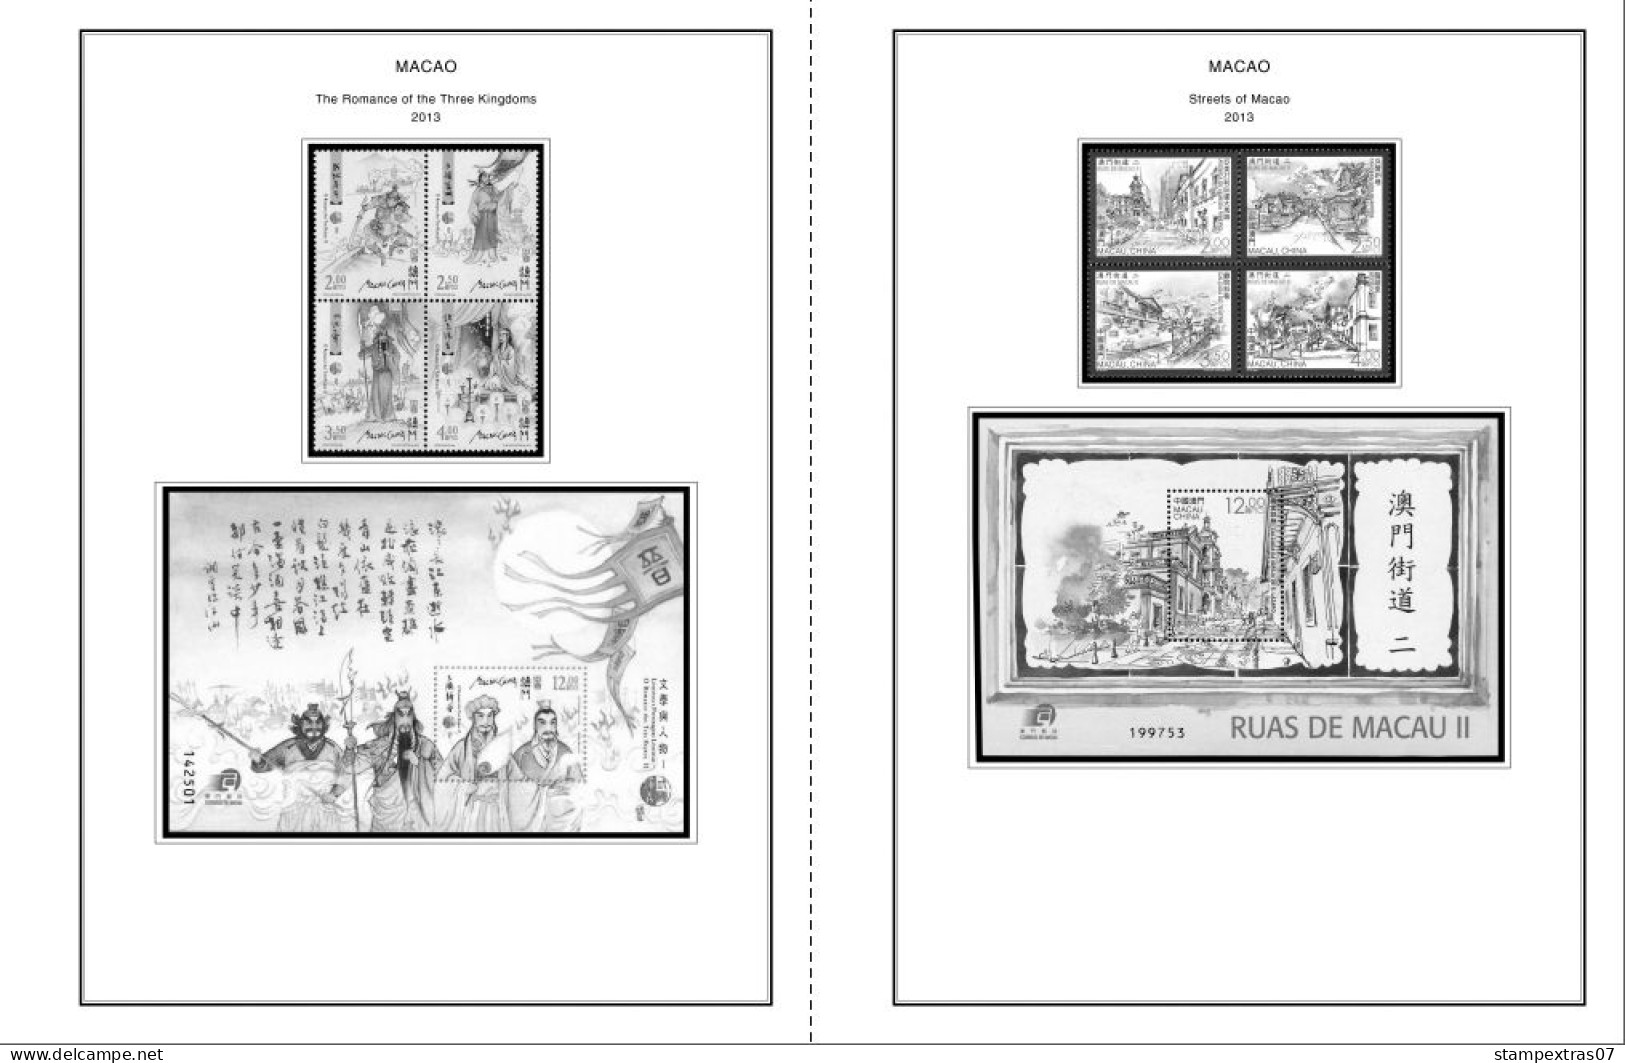 MACAO [SAR] 1999-2010 + 2011-2020 STAMP ALBUM PAGES (248 b&w illustrated pages)